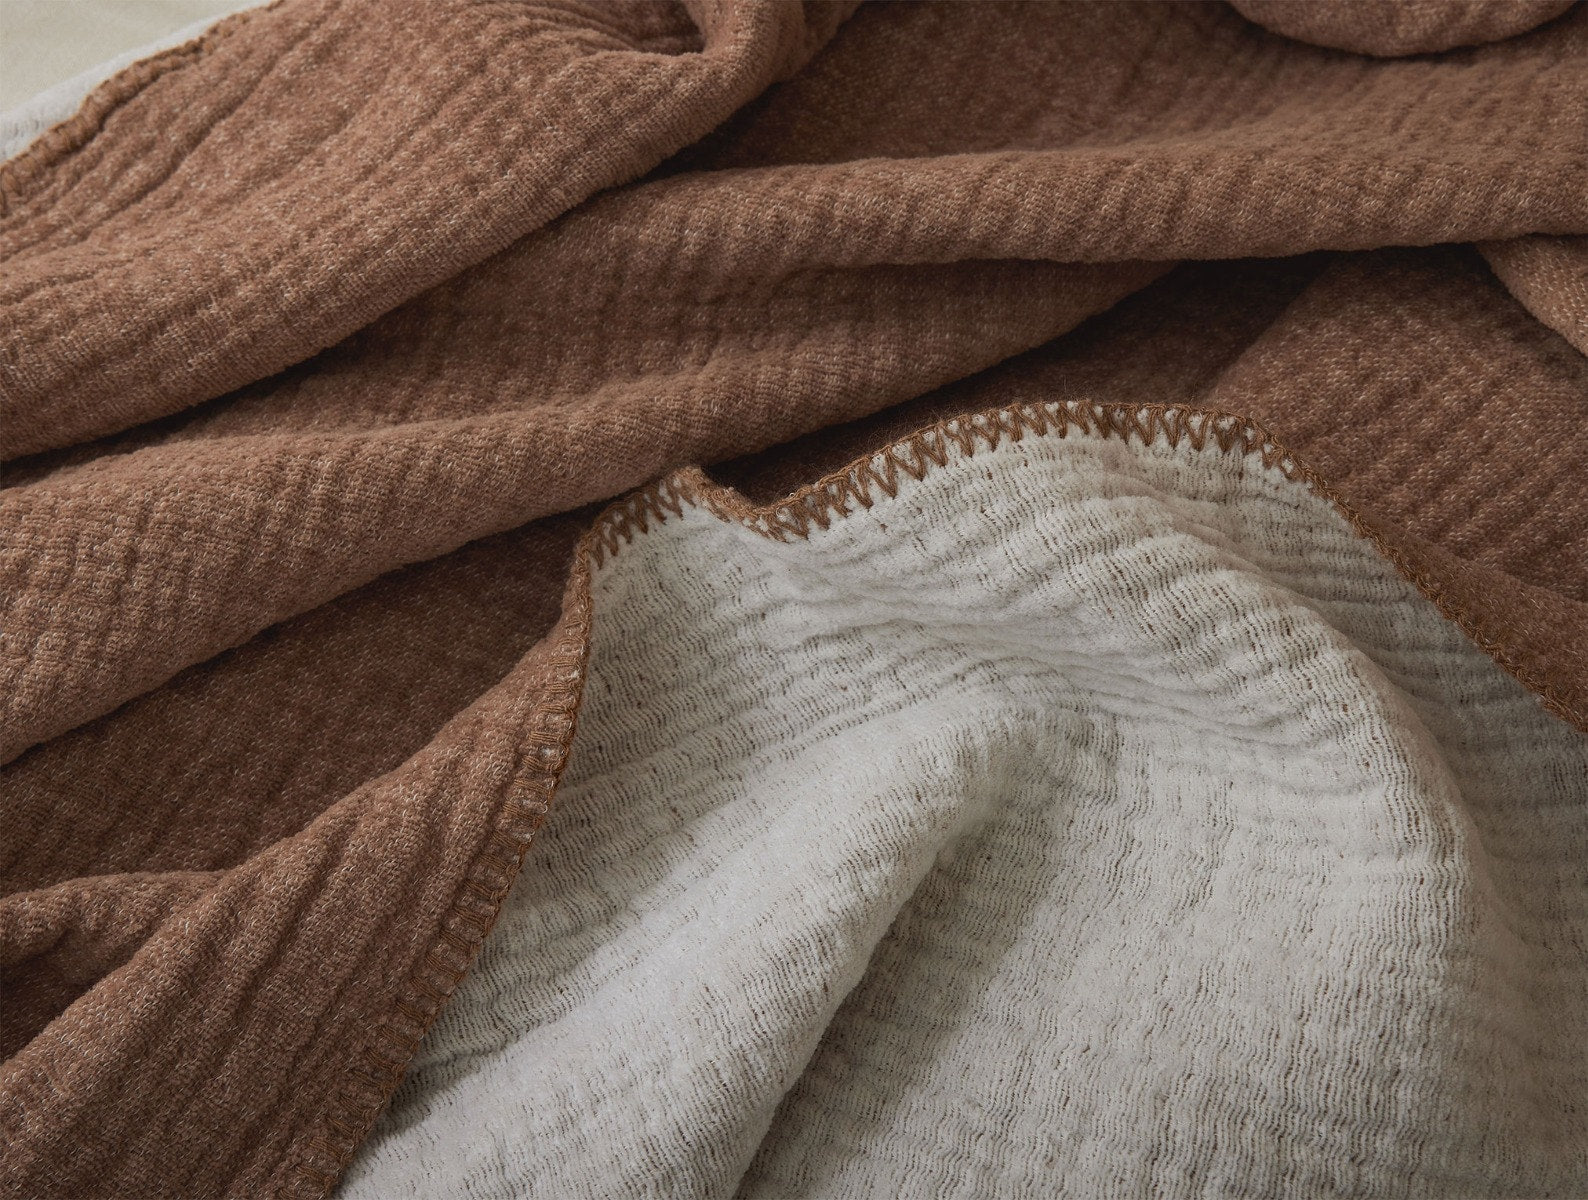 The 9 Best Heated Blankets and Throws for Ultimate Coziness